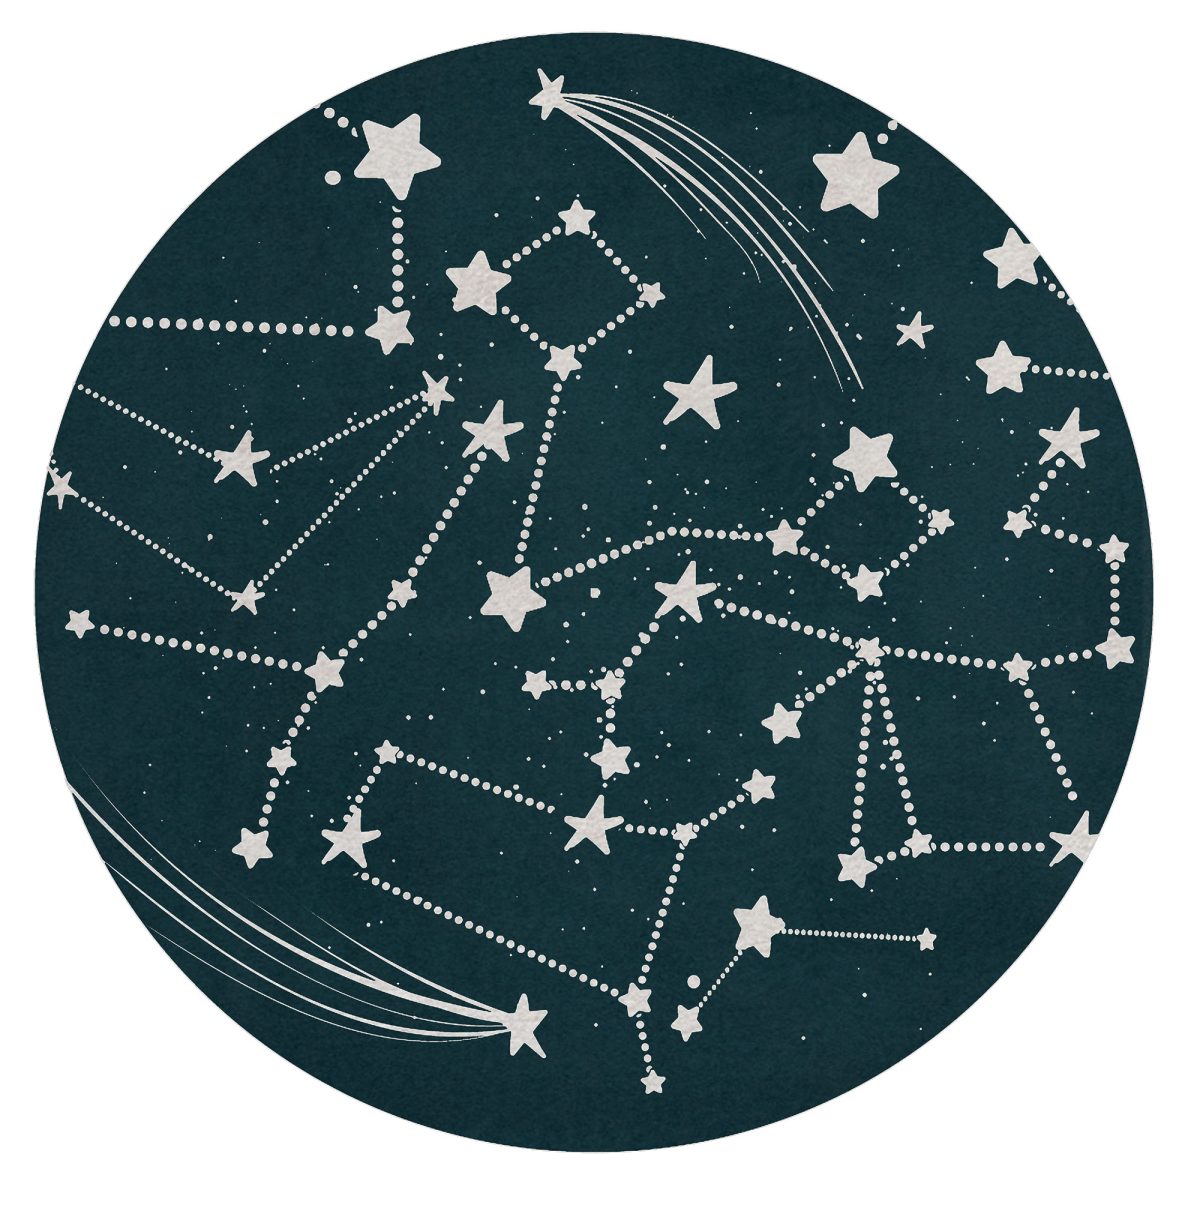 Get inspired by the galaxy´s constellations with the Stellar round rug!